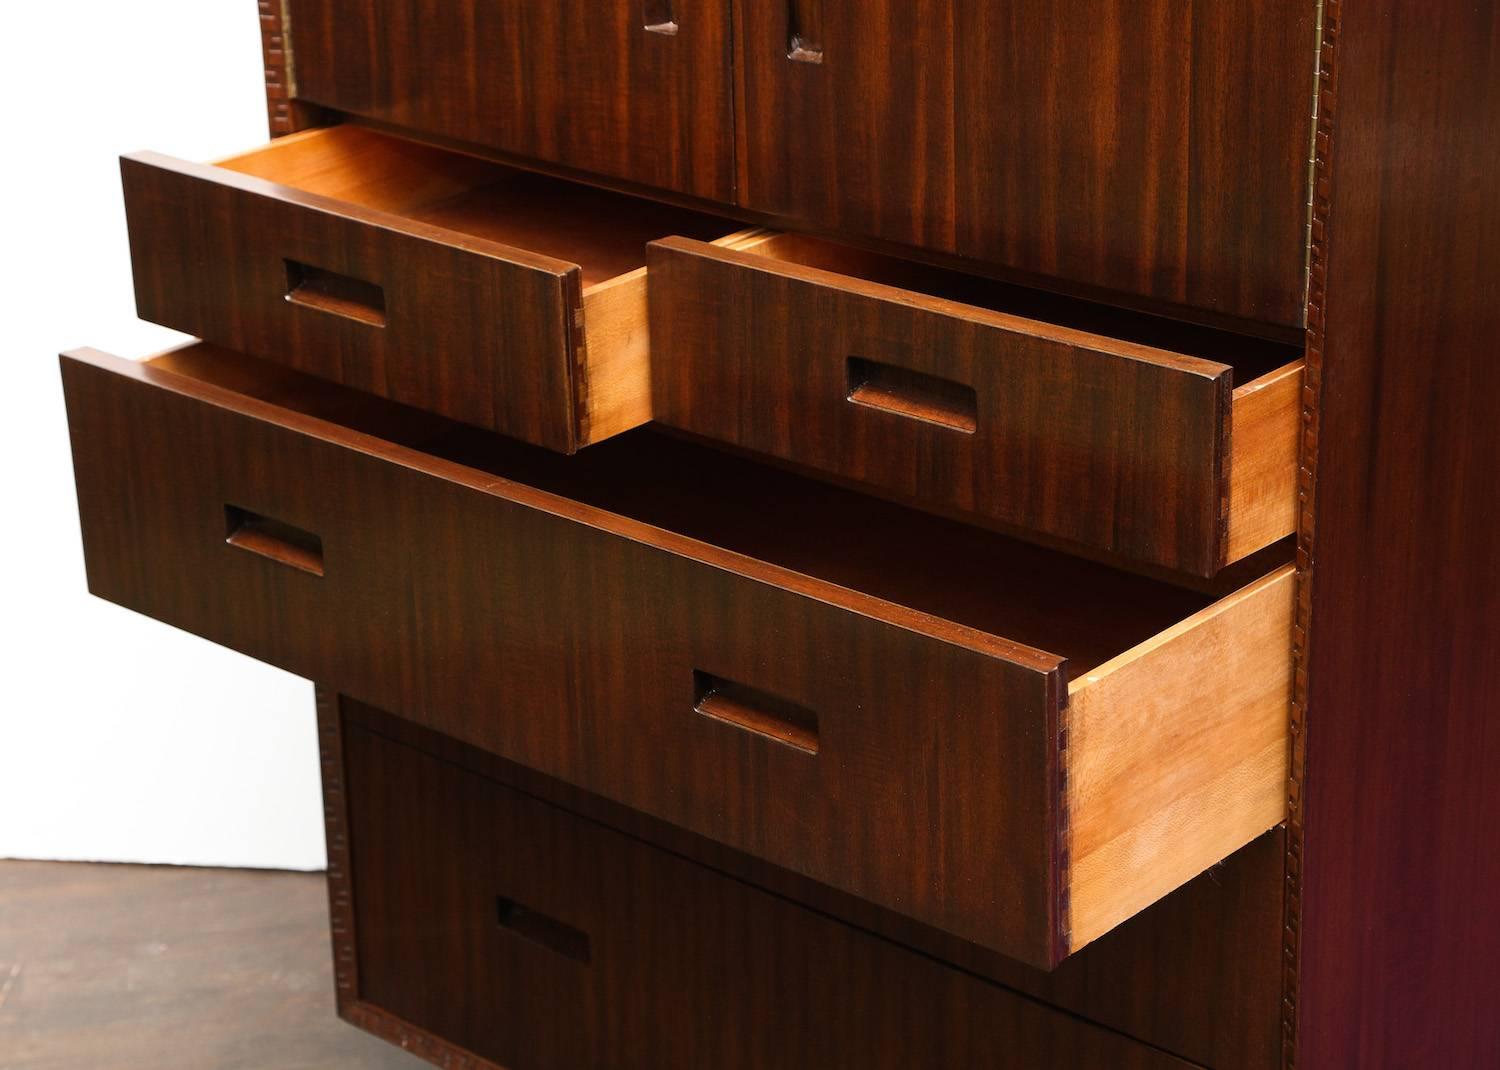 Frank Lloyd Wright for Heritage Henredon, model #2000.  Six-drawer chest of dark stained mahogany with carved detailing and an architectural base. Two doors open to reveal three slotted storage areas, and all drawers and doors have clean inset